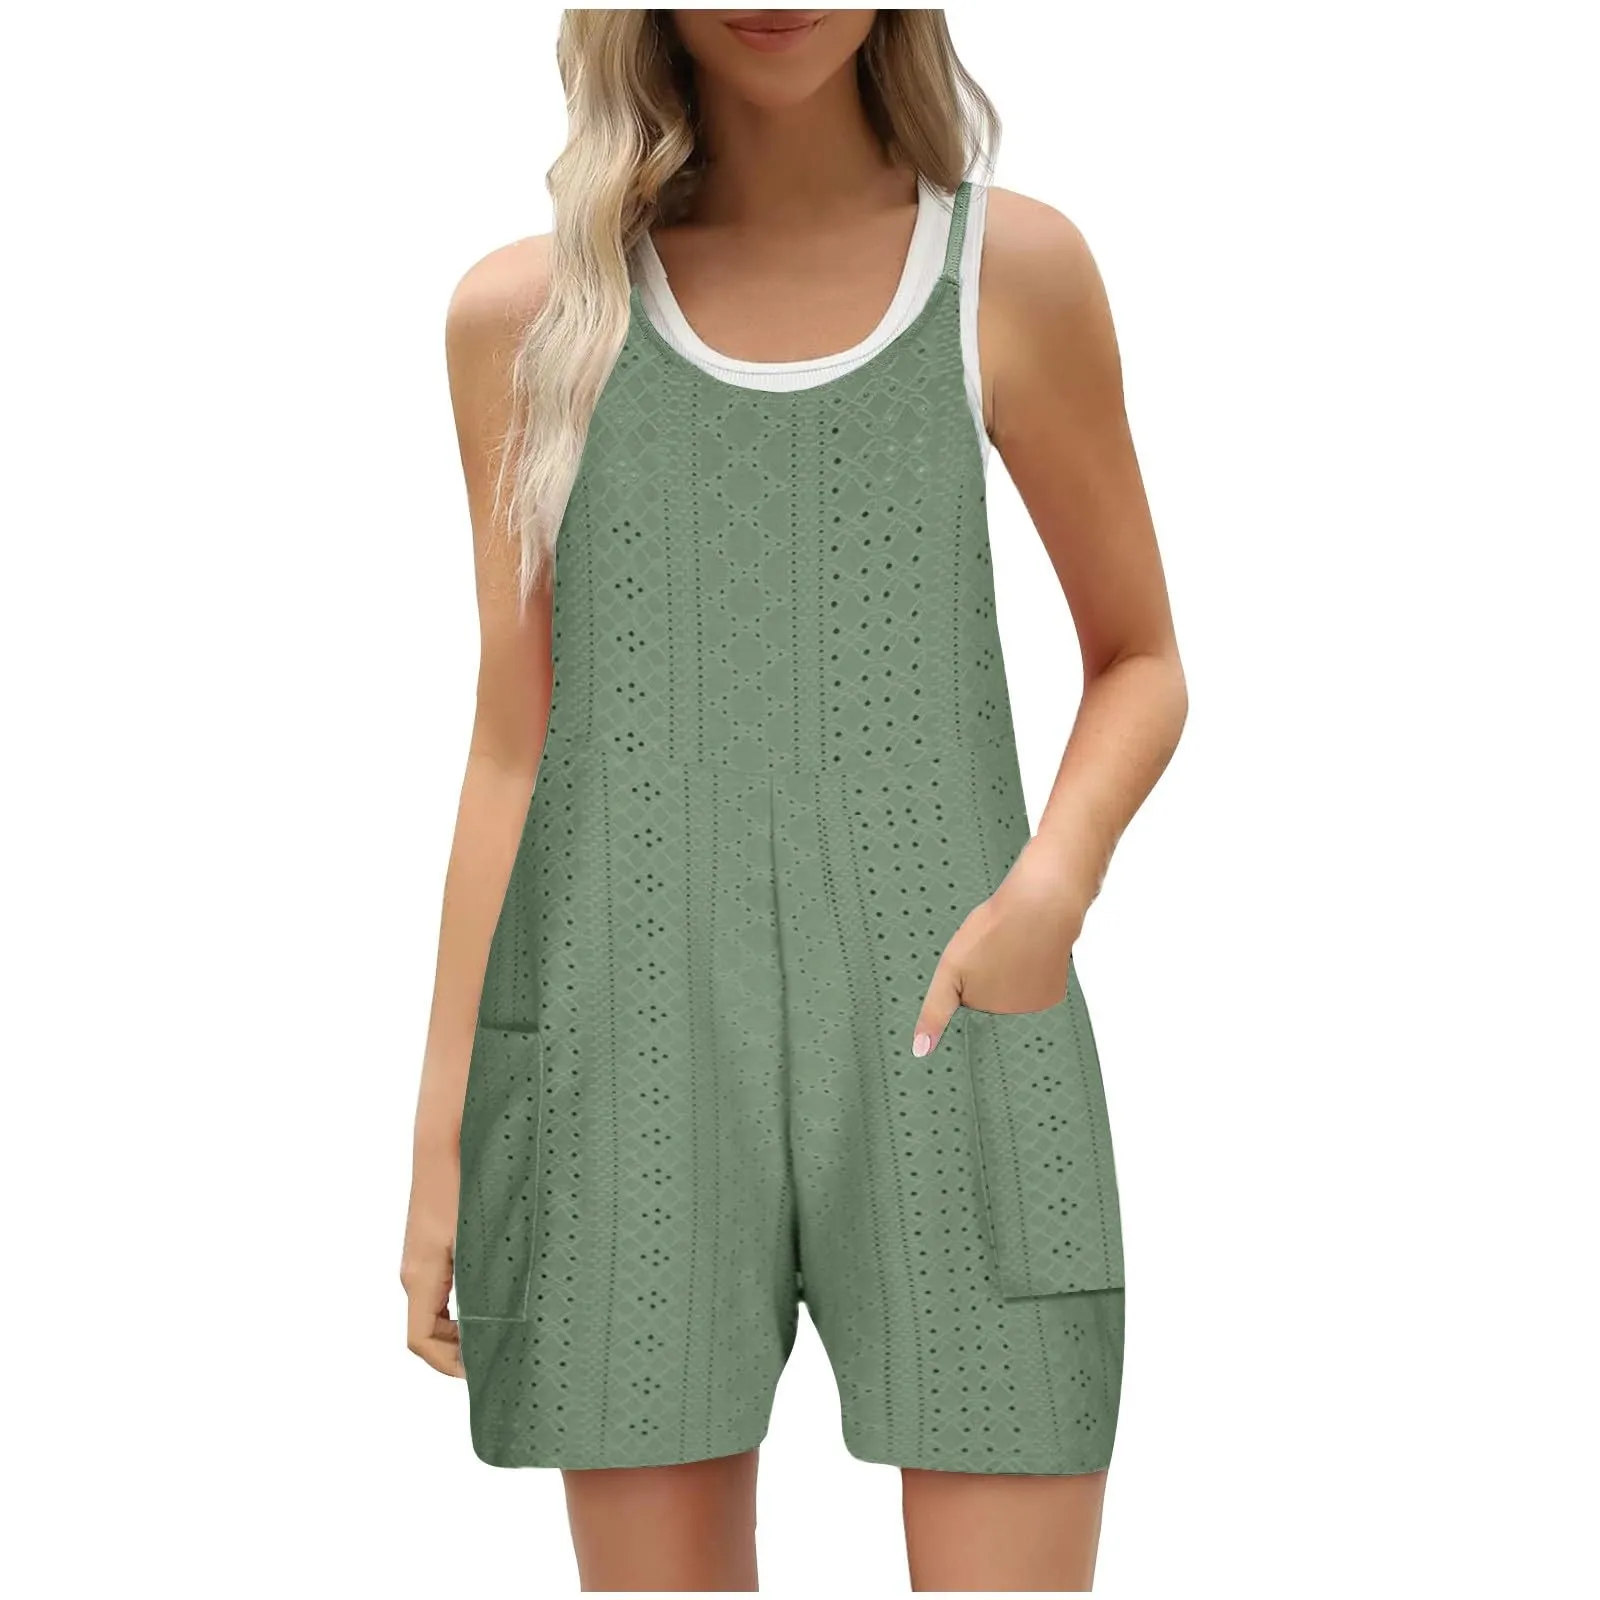 

Womens Summer Eyelets Shorts Rompers Loose Spaghetti Strap Sleeveless Casual Bib Shorts Jumpsuit Overalls With Pockets